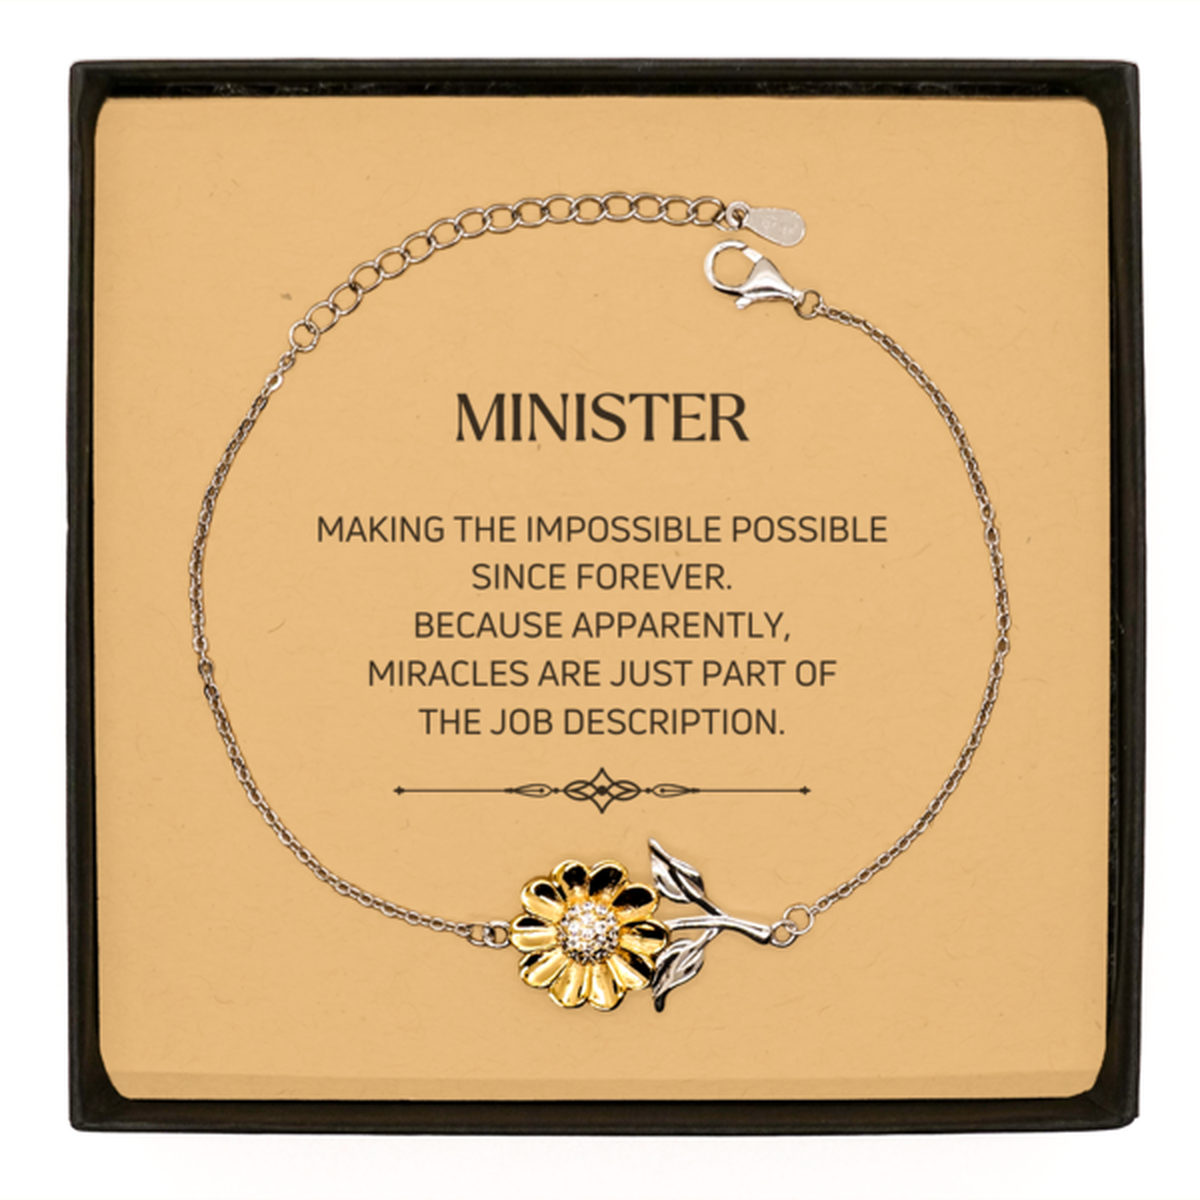 Funny Minister Gifts, Miracles are just part of the job description, Inspirational Birthday Sunflower Bracelet For Minister, Men, Women, Coworkers, Friends, Boss